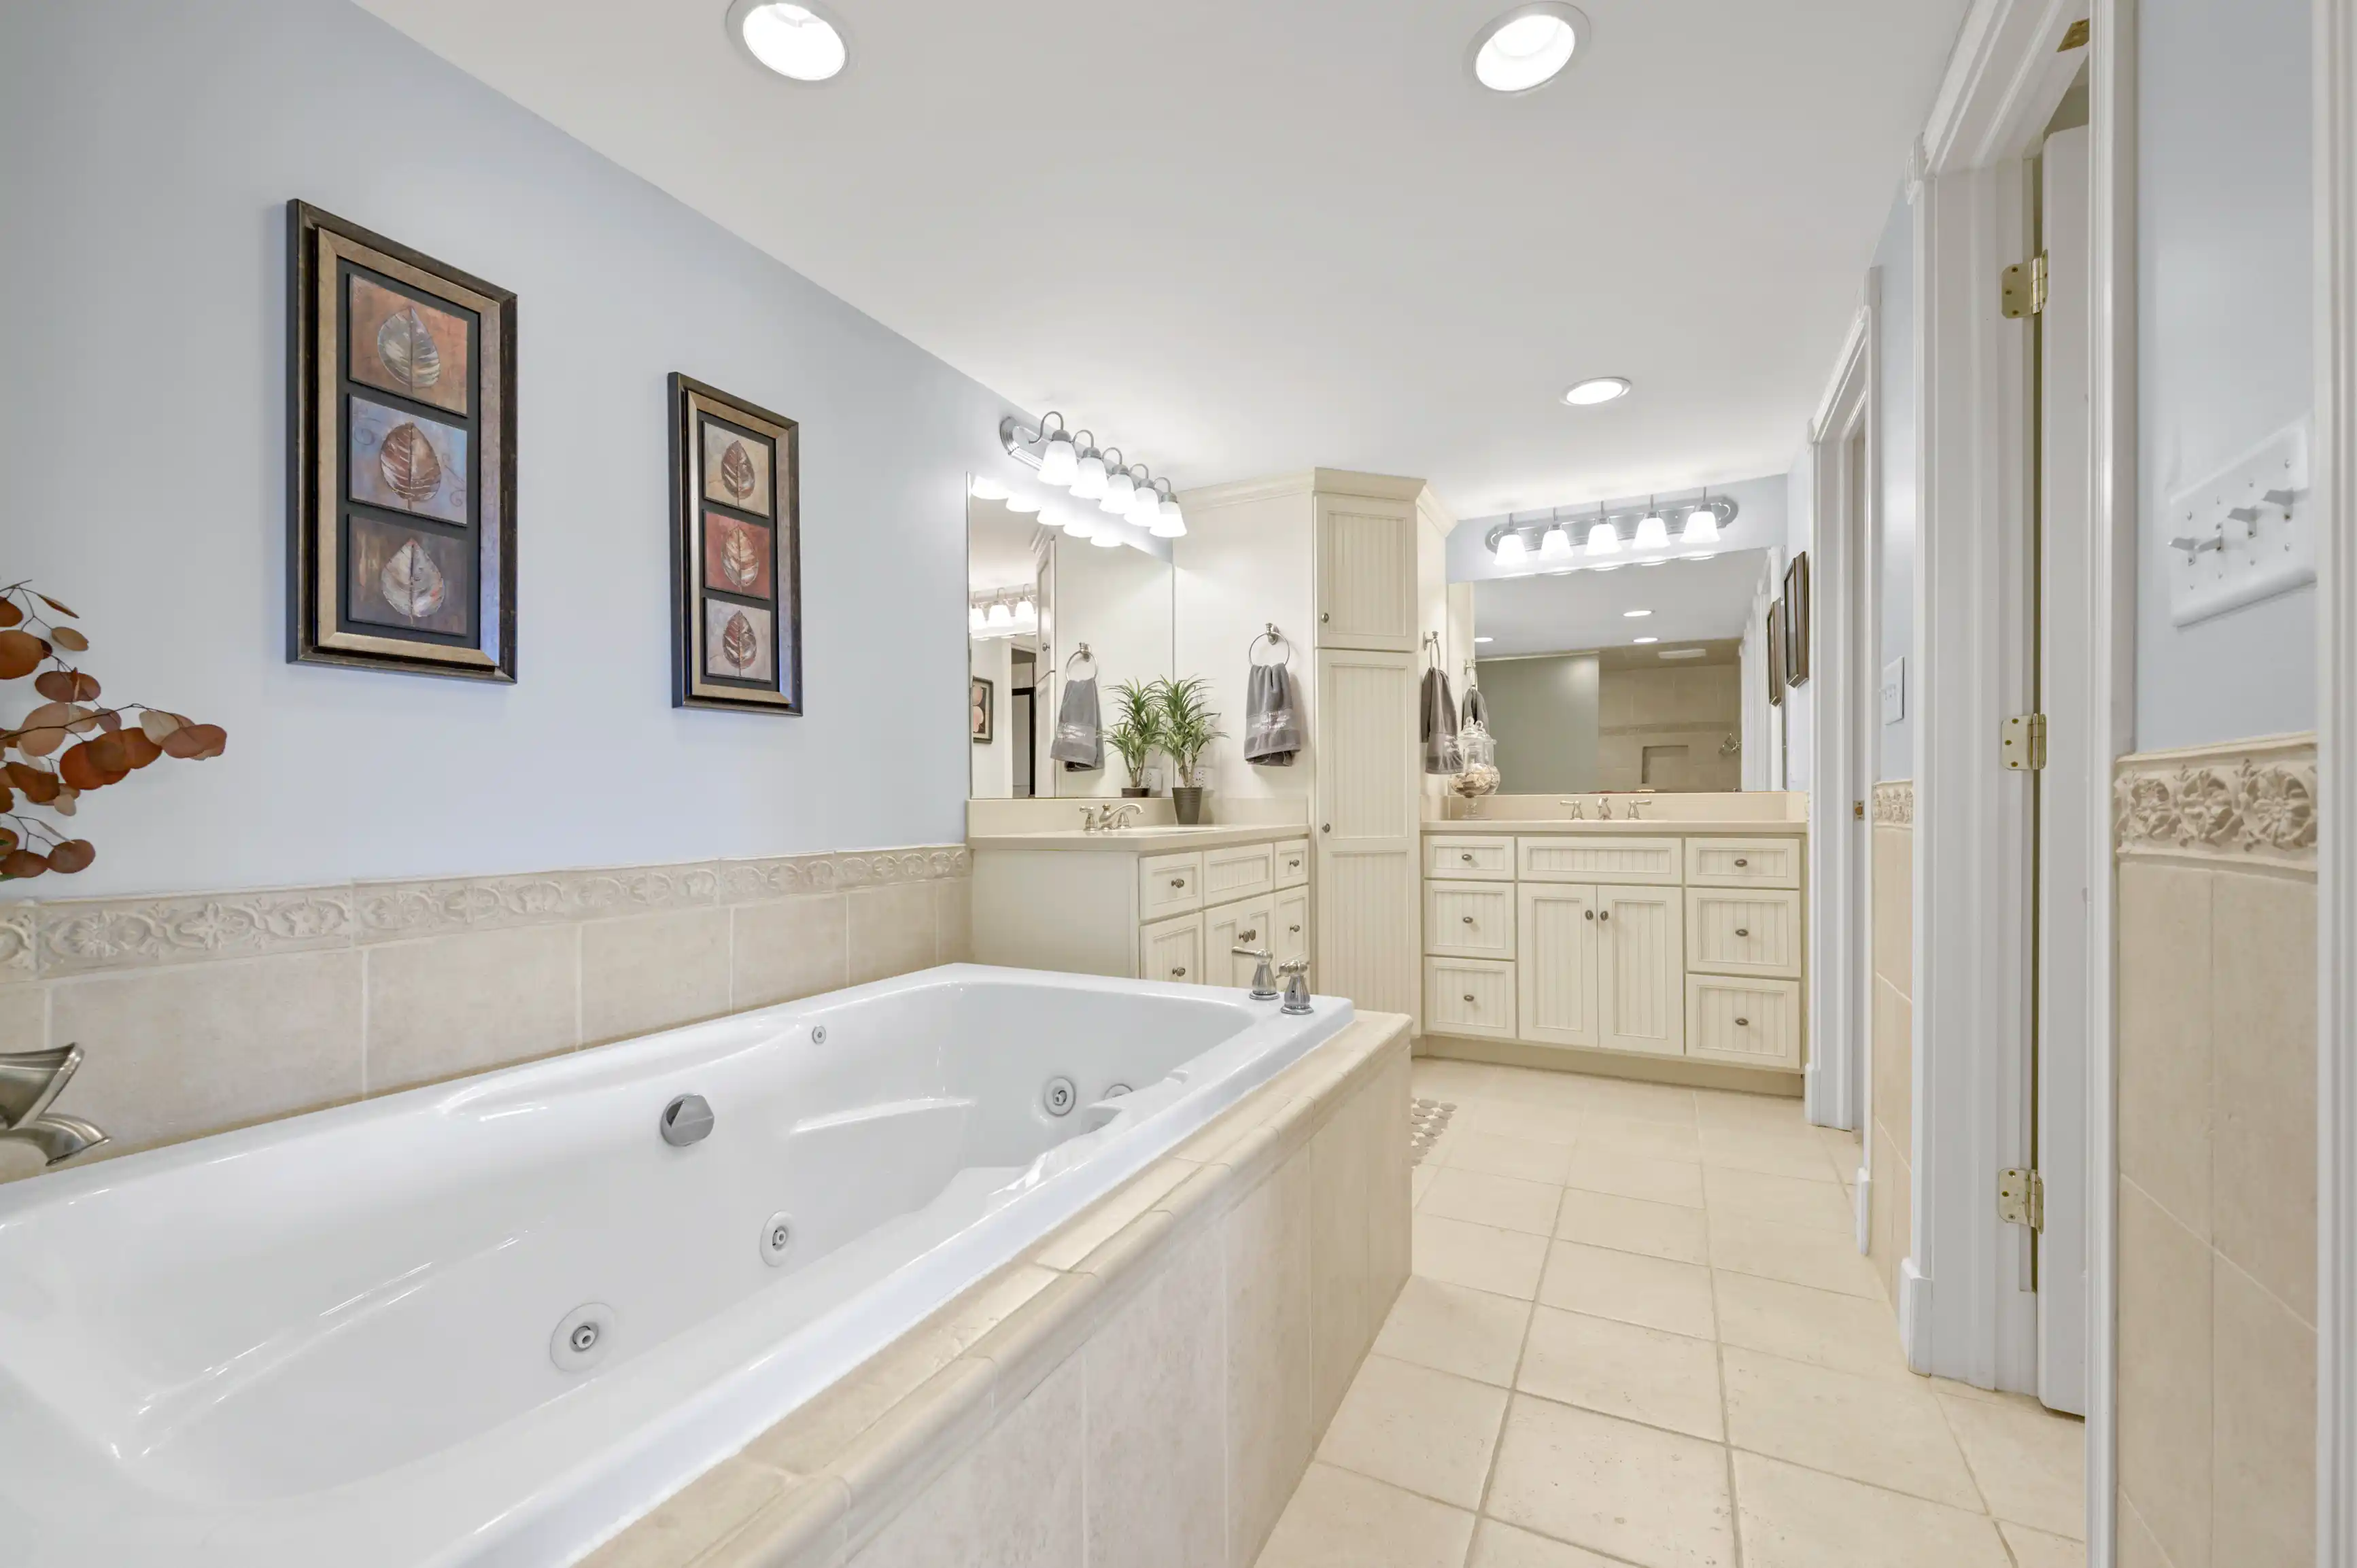 Bright and spacious bathroom with a large jacuzzi tub, double vanity sink with a large mirror and vanity lights, framed artwork on the walls, and tiled flooring.